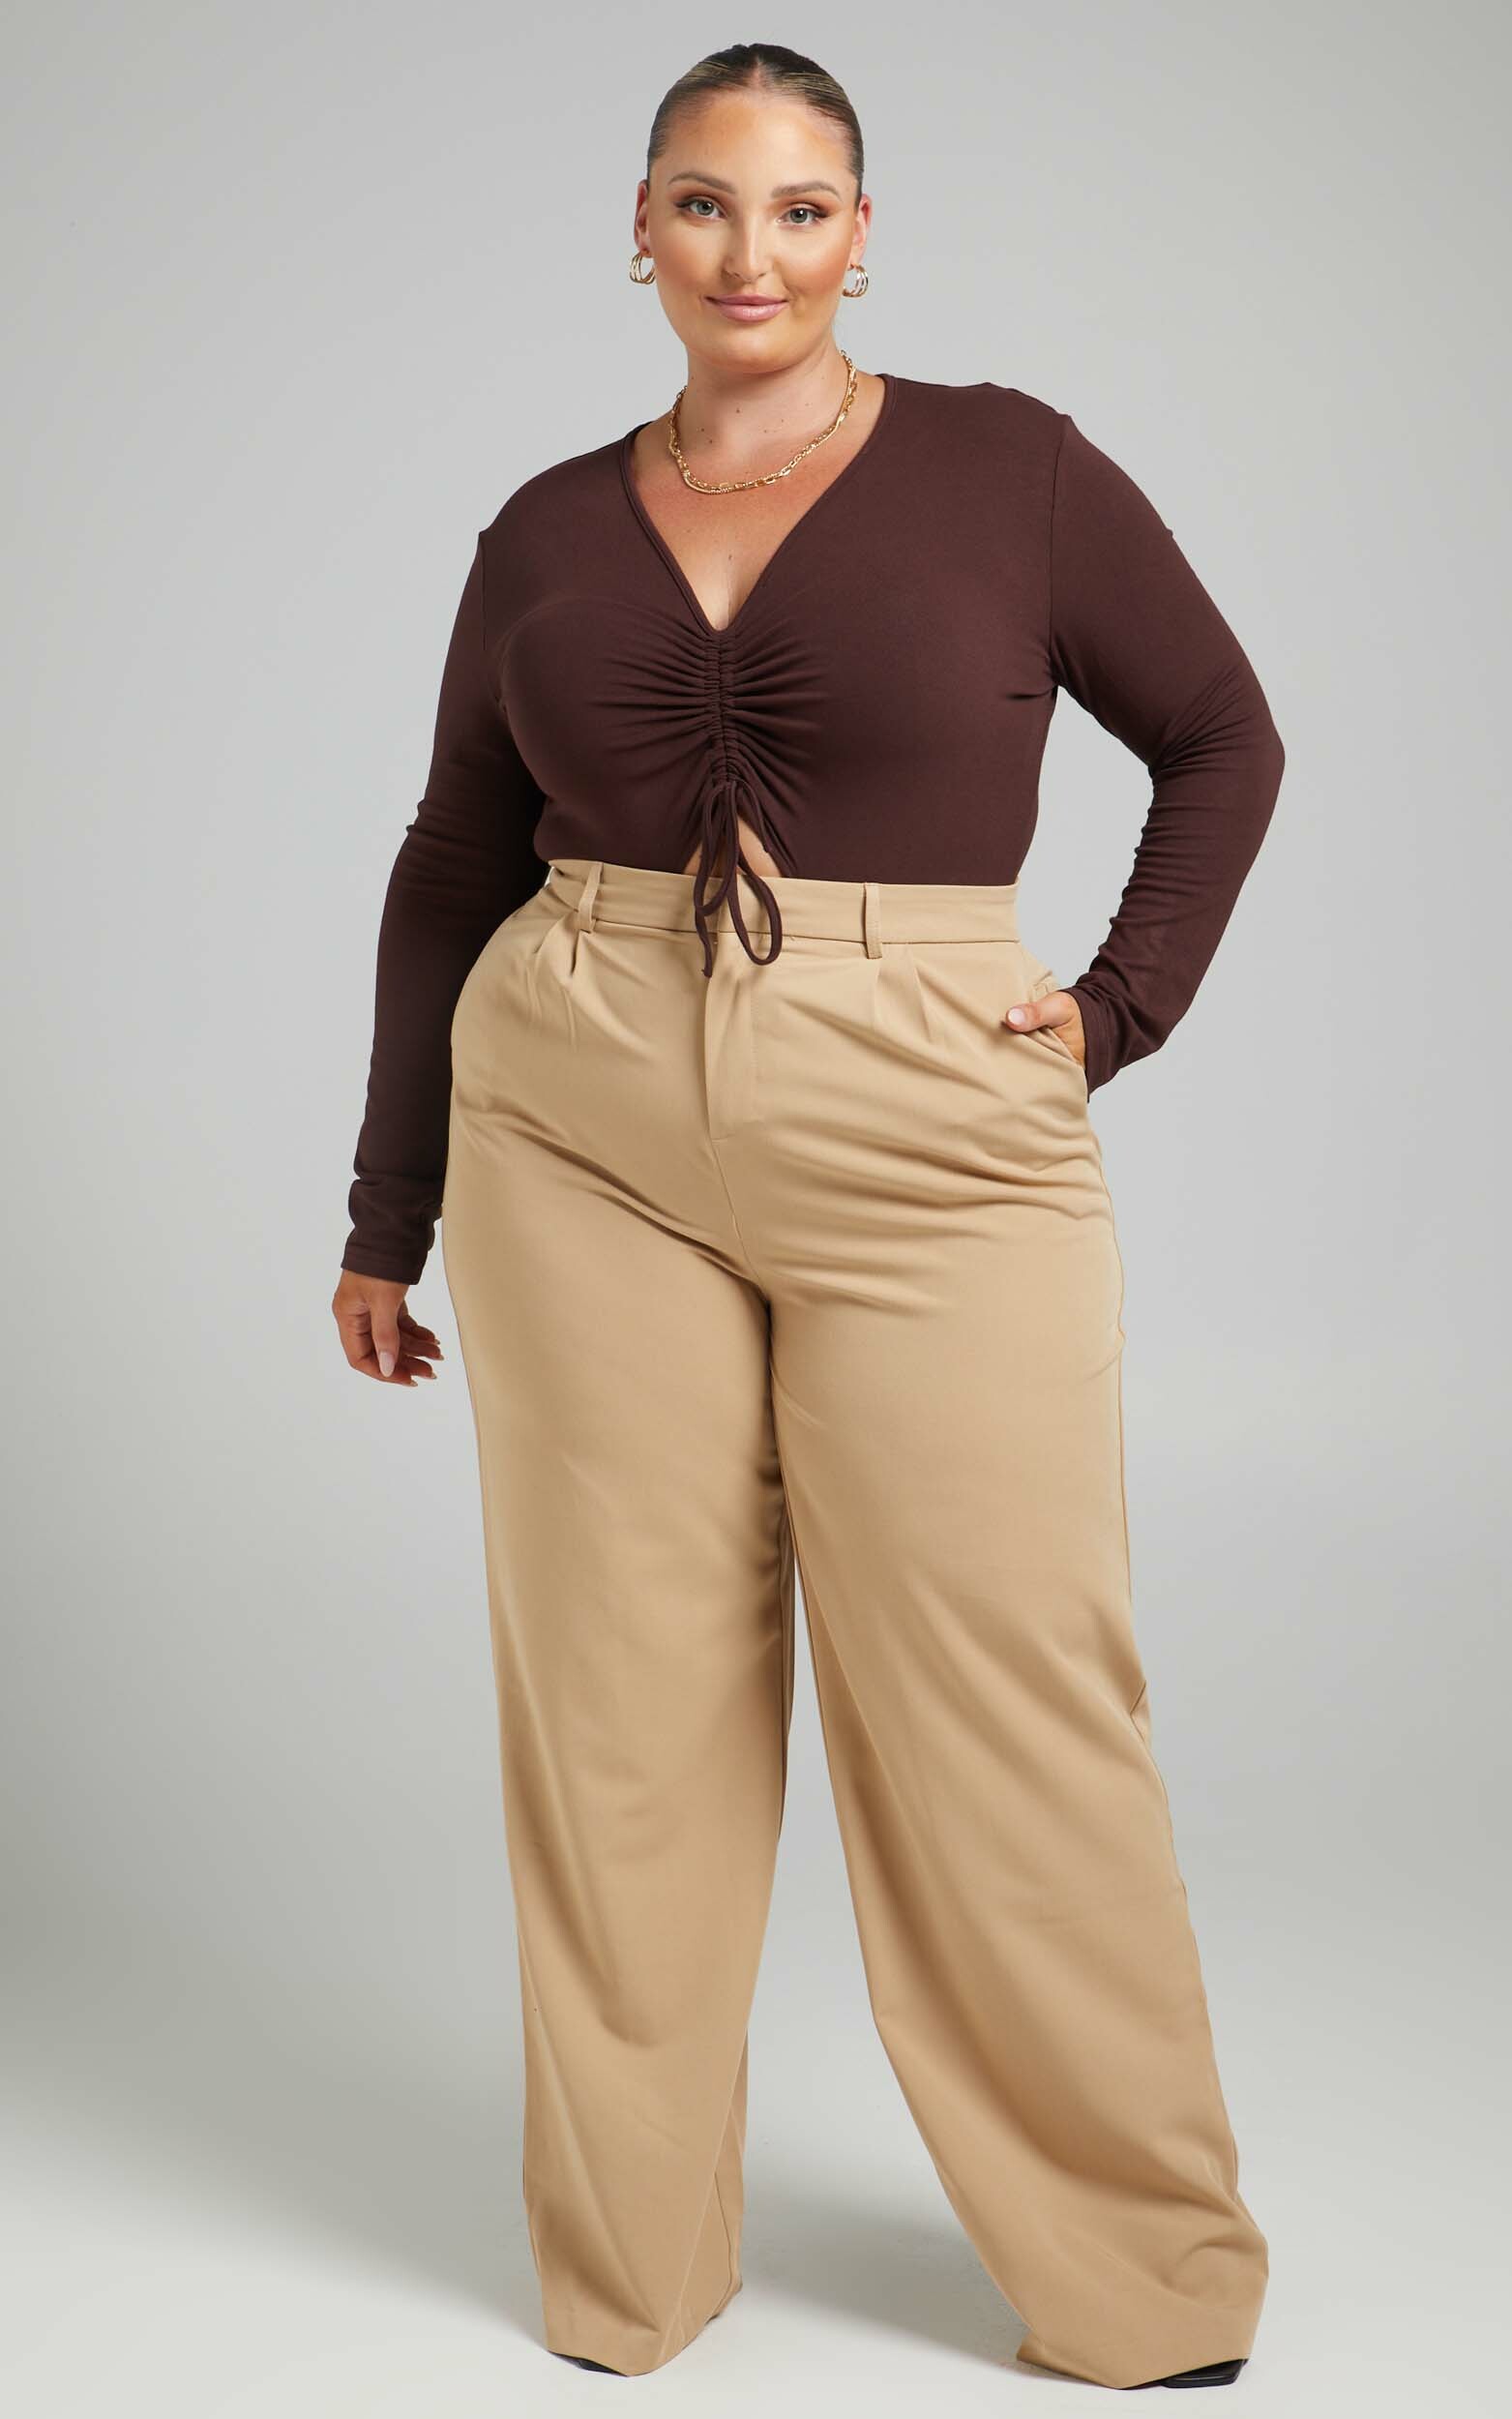 Lorcan High Waisted Tailored Pants in Camel - 04, BRN1, hi-res image number null